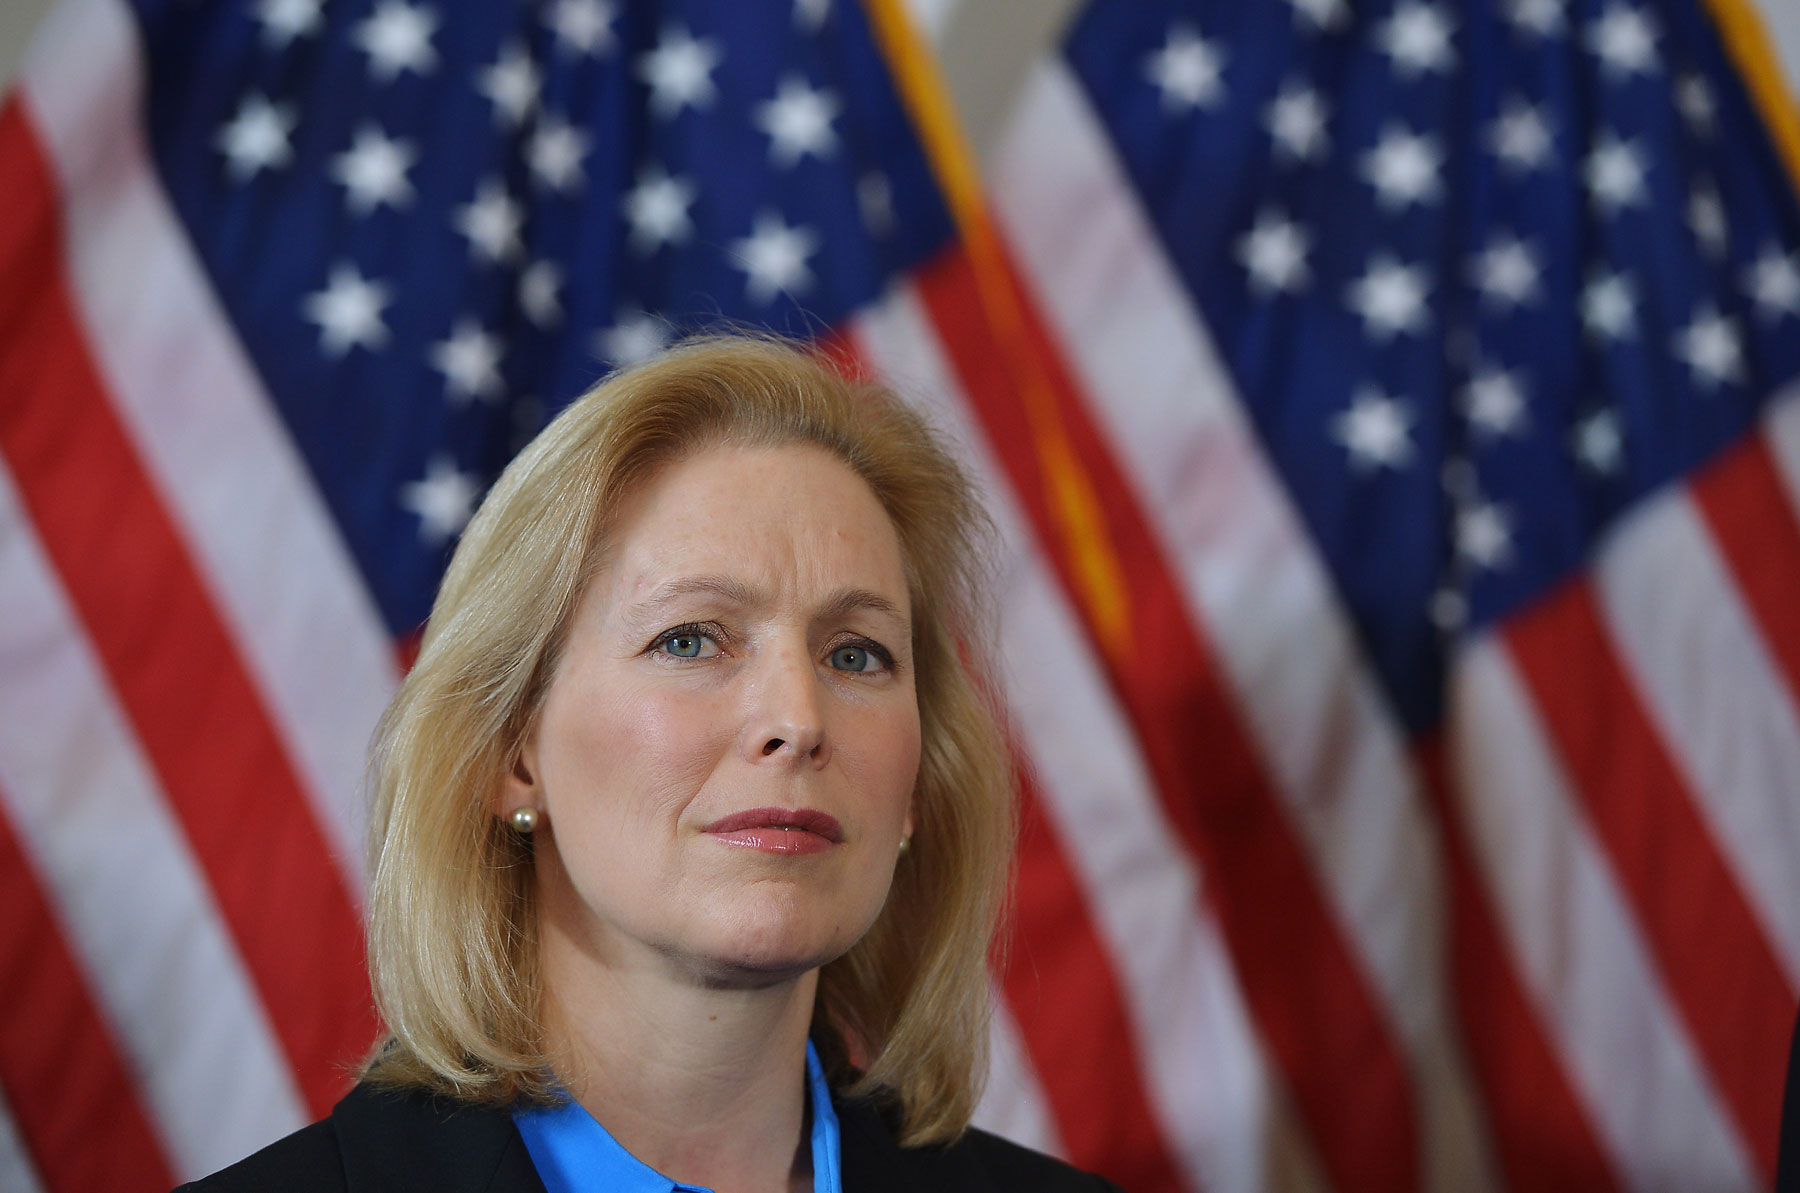 Senator Kirsten Gillibrand attends a press conference on Capitol Hill in Washington, D.C. on Feb. 6, 2014, calling for the creation of an independent military justice system to deal with sexual assault in the military.